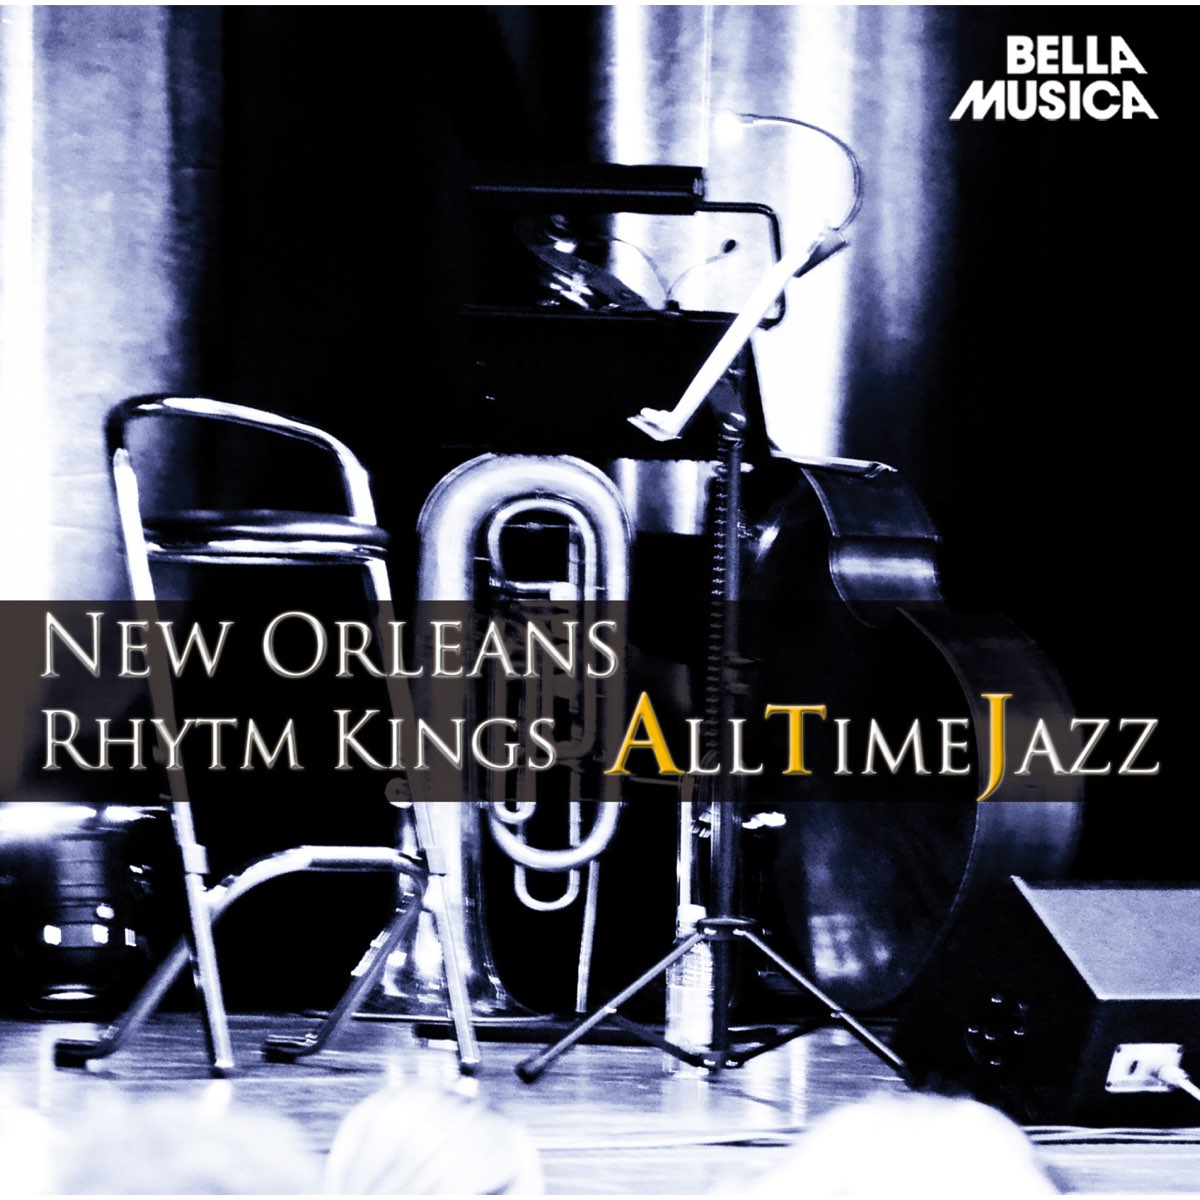 ‎all Time Jazz New Orleans Rhythm Kings By The New Orleans Rhythm Kings On Apple Music 1129